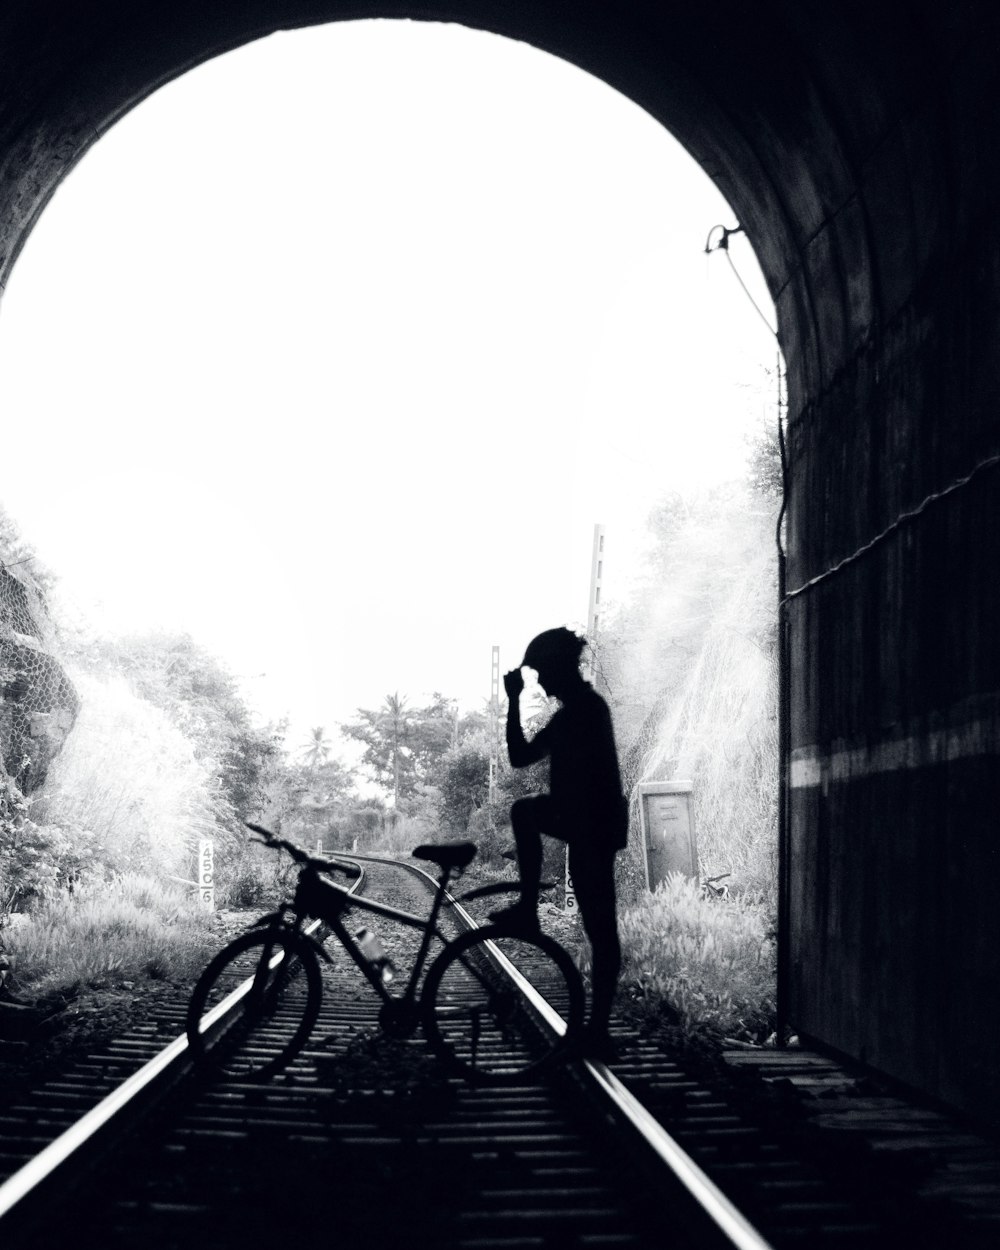 man and woman riding bicycle in tunnel